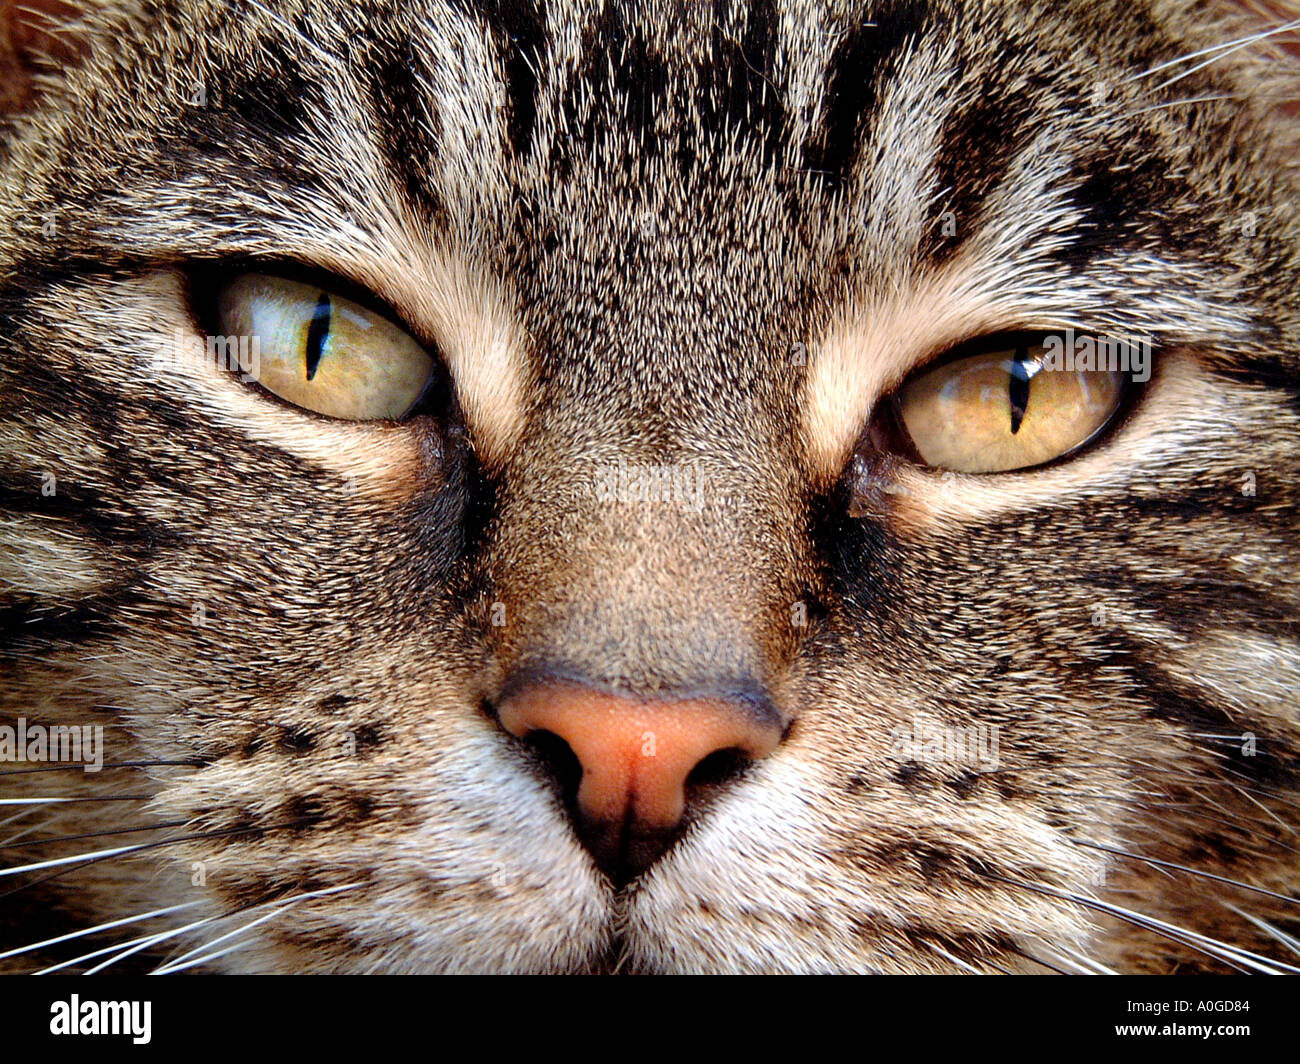 Close up of a domestic Tabby cat Stock Photo